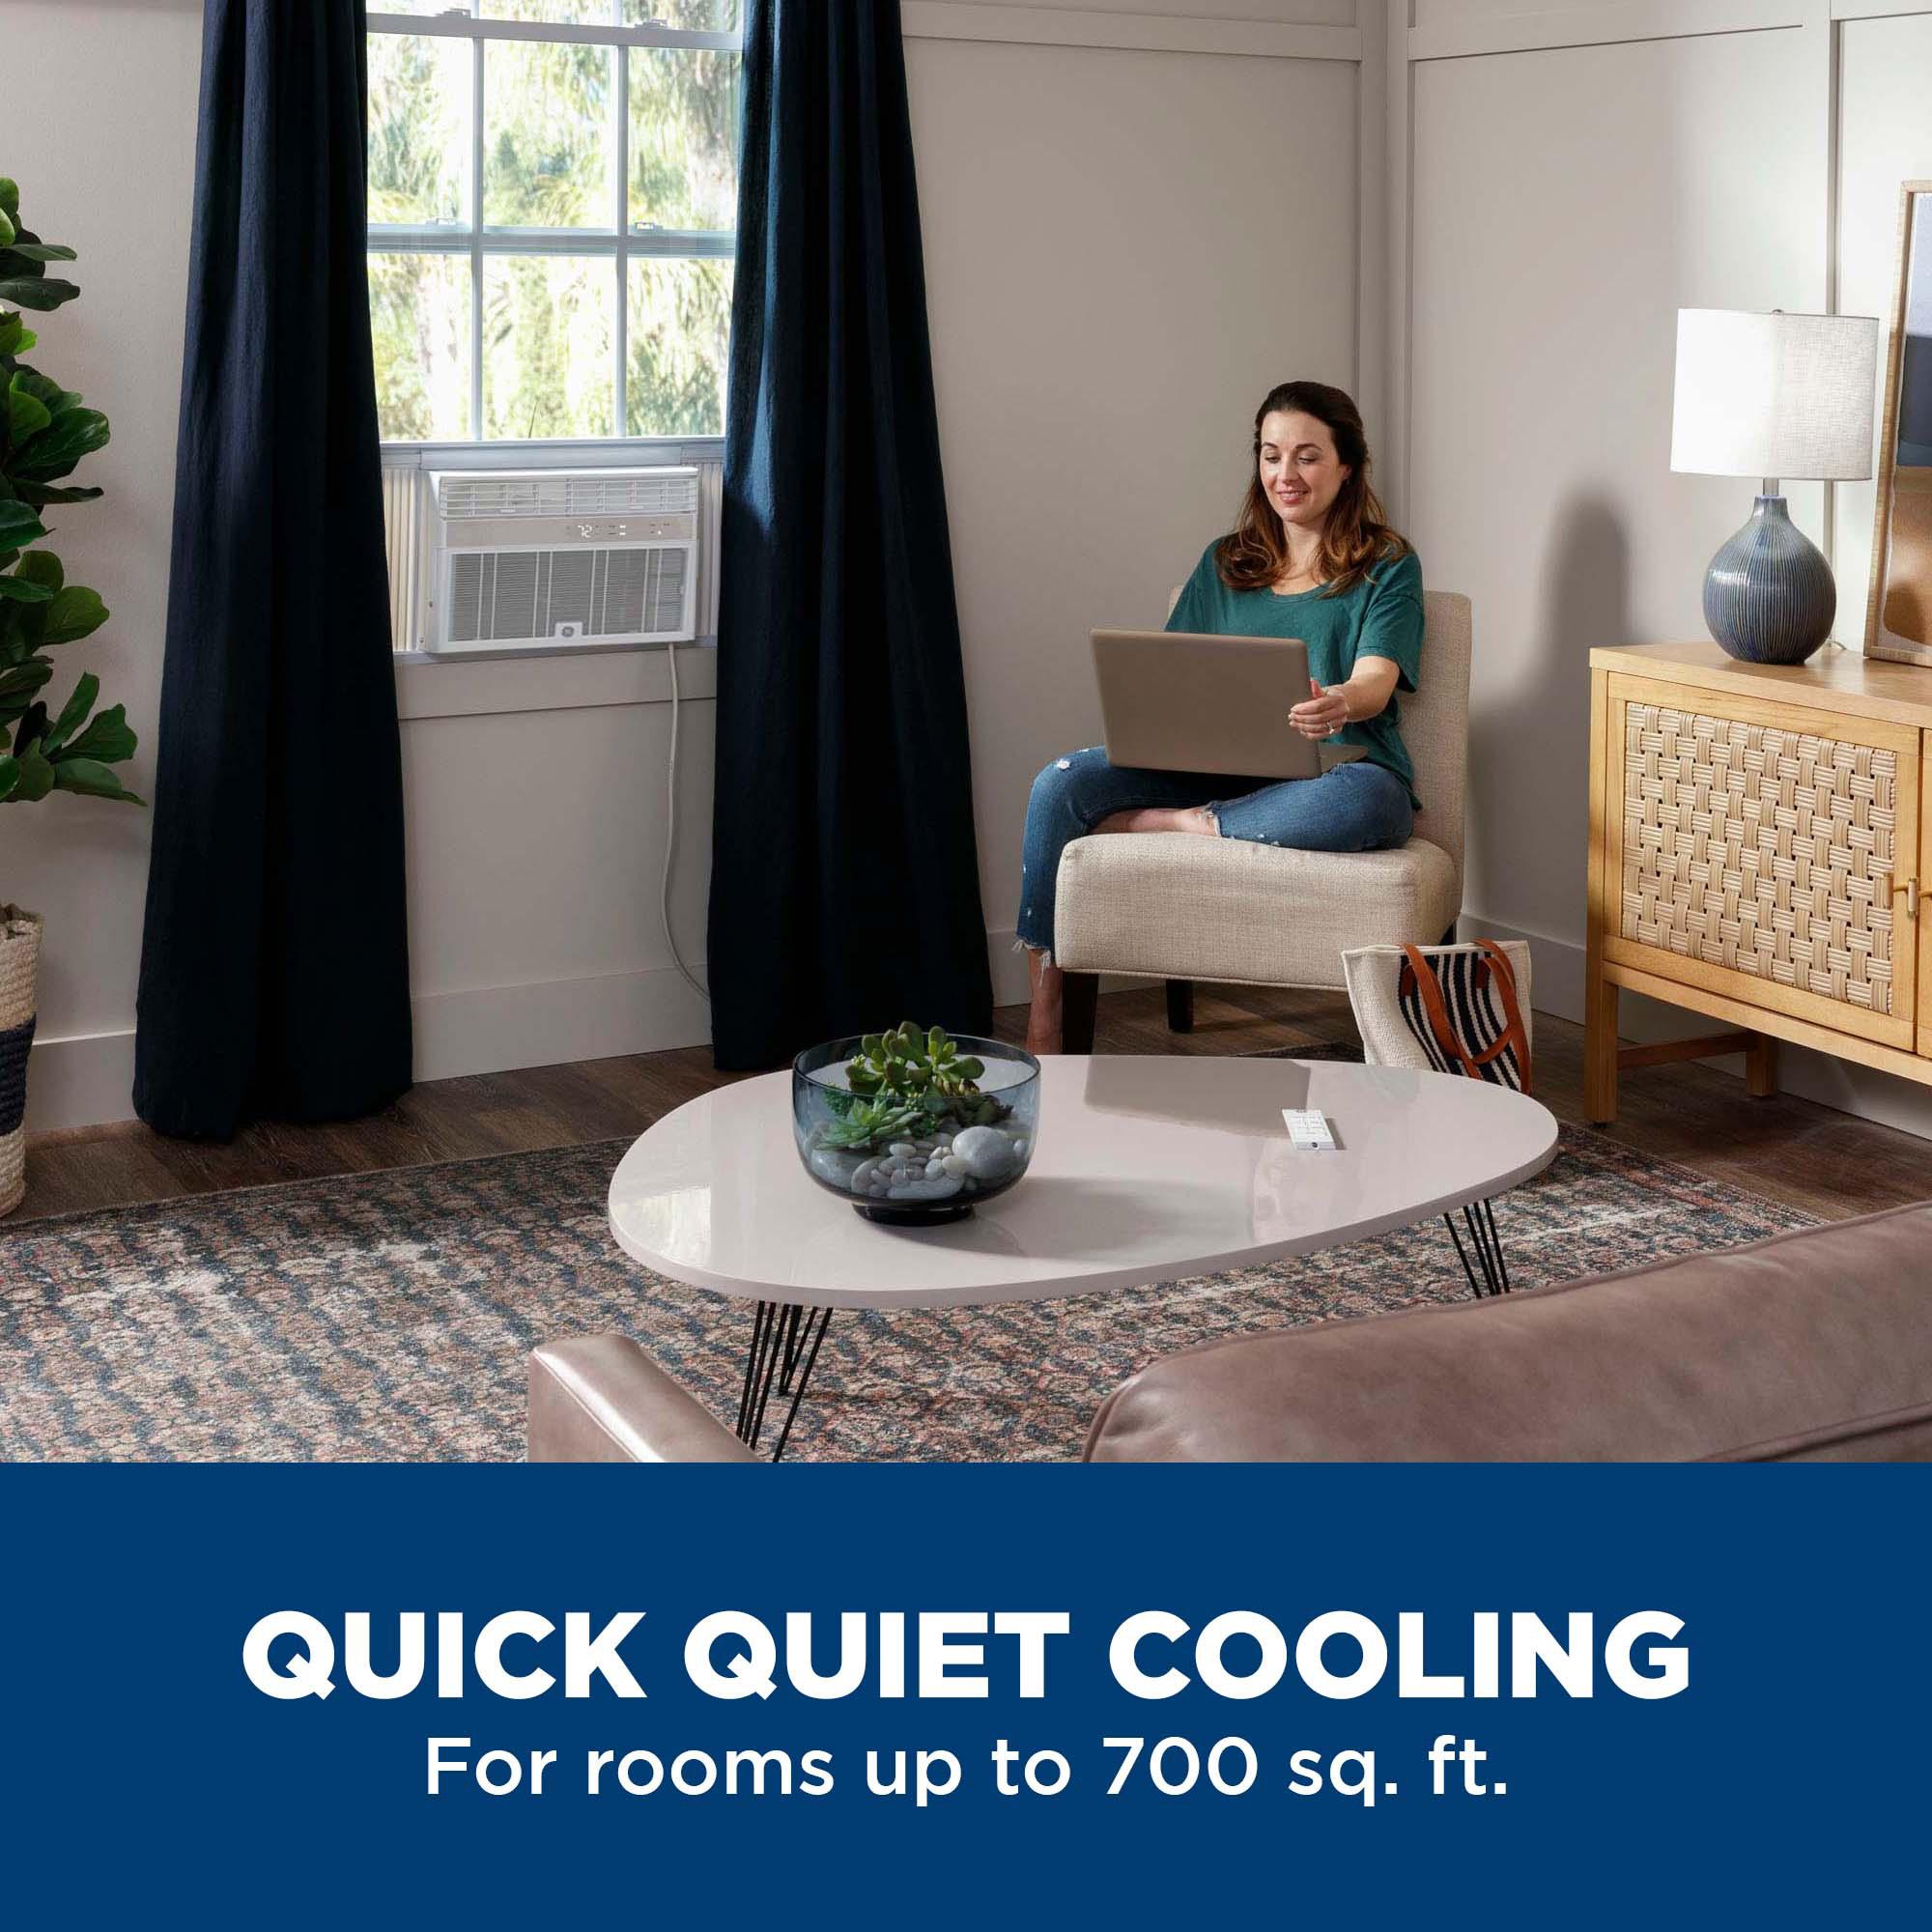 GE® 14,000 BTU Smart Electronic Window Air Conditioner for Large Rooms up to 700 sq. ft.